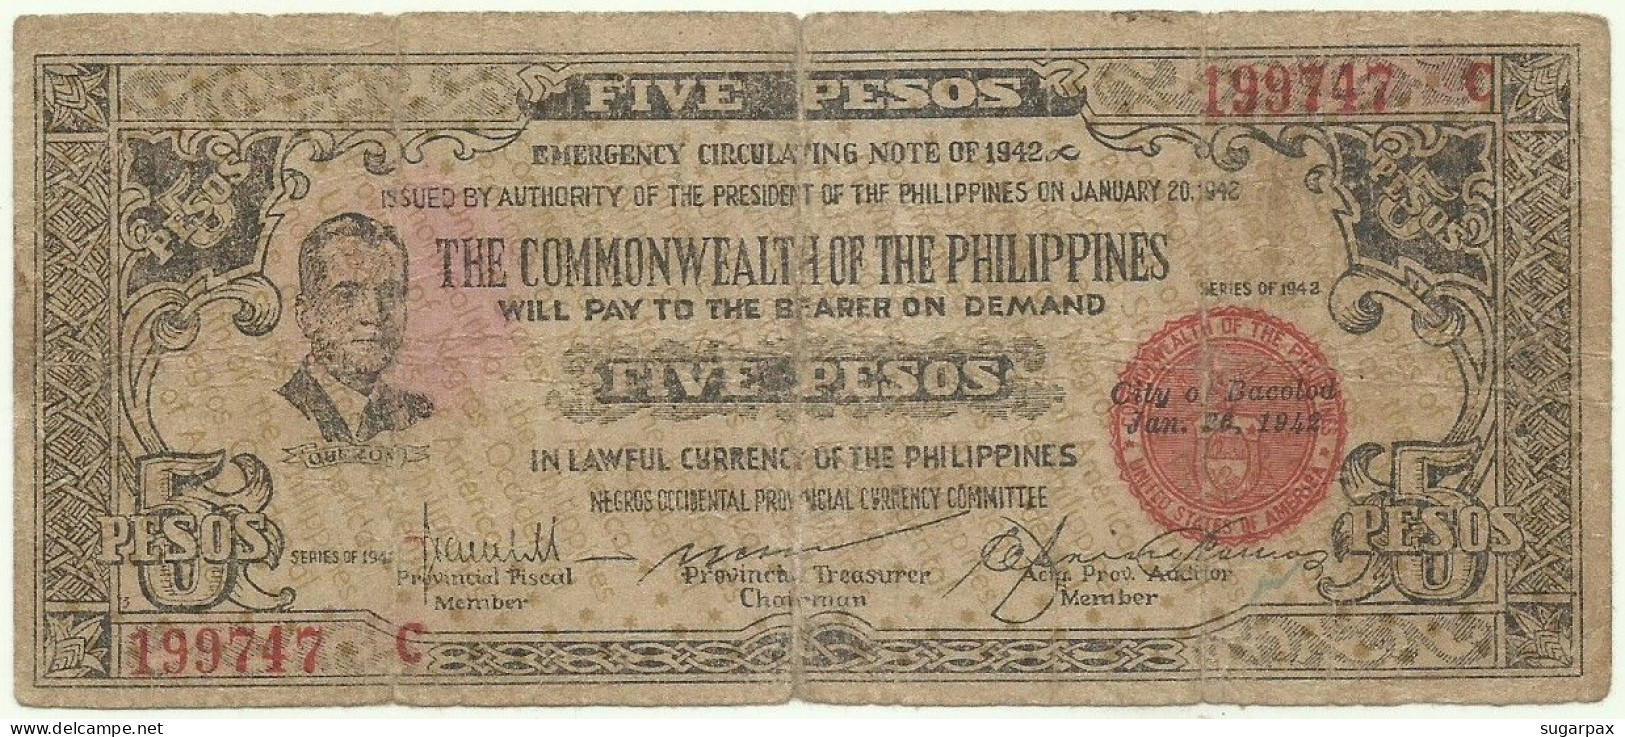 PHILIPPINES - 5 Pesos - 1942 - Pick S 648.a - Serie C - NEGROS Occidental Provincial Currency Committee - Filippine